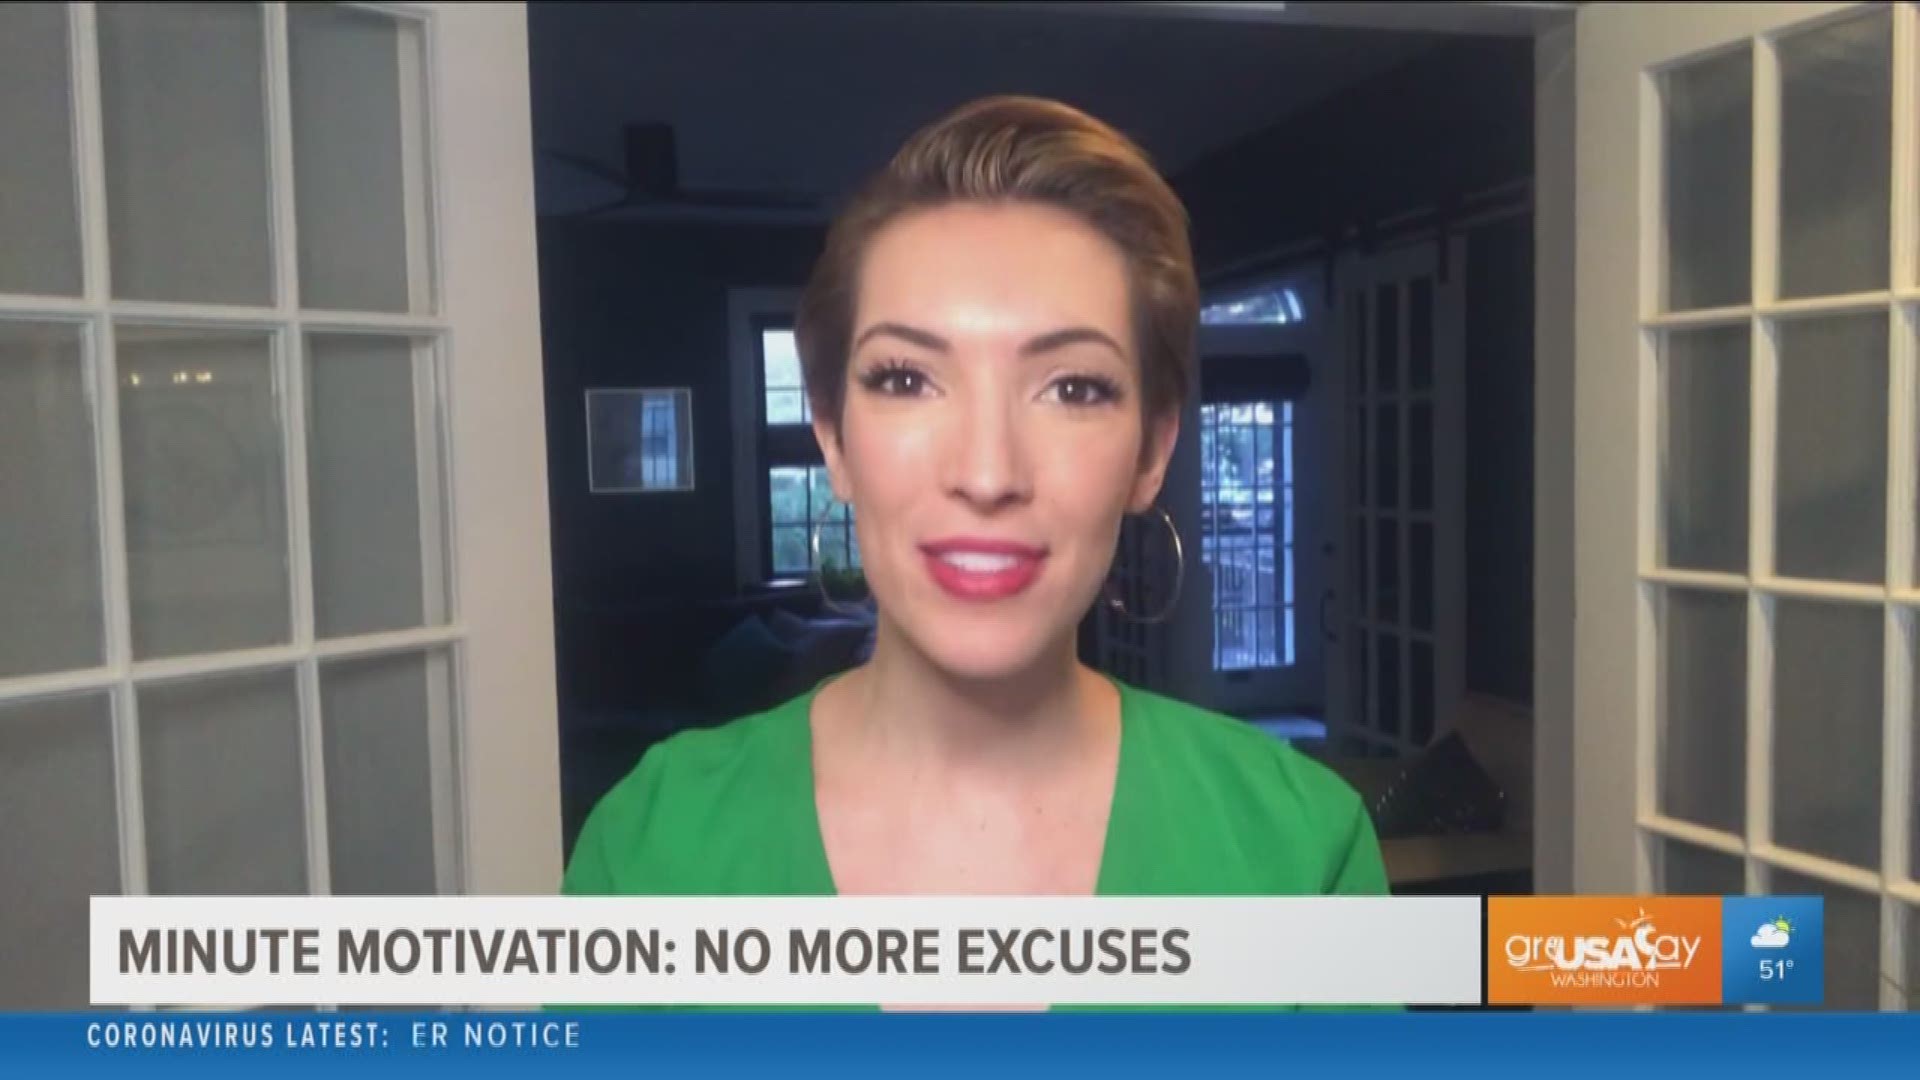 Watch Ellen's "Minute Motivation" on combating those excuses.